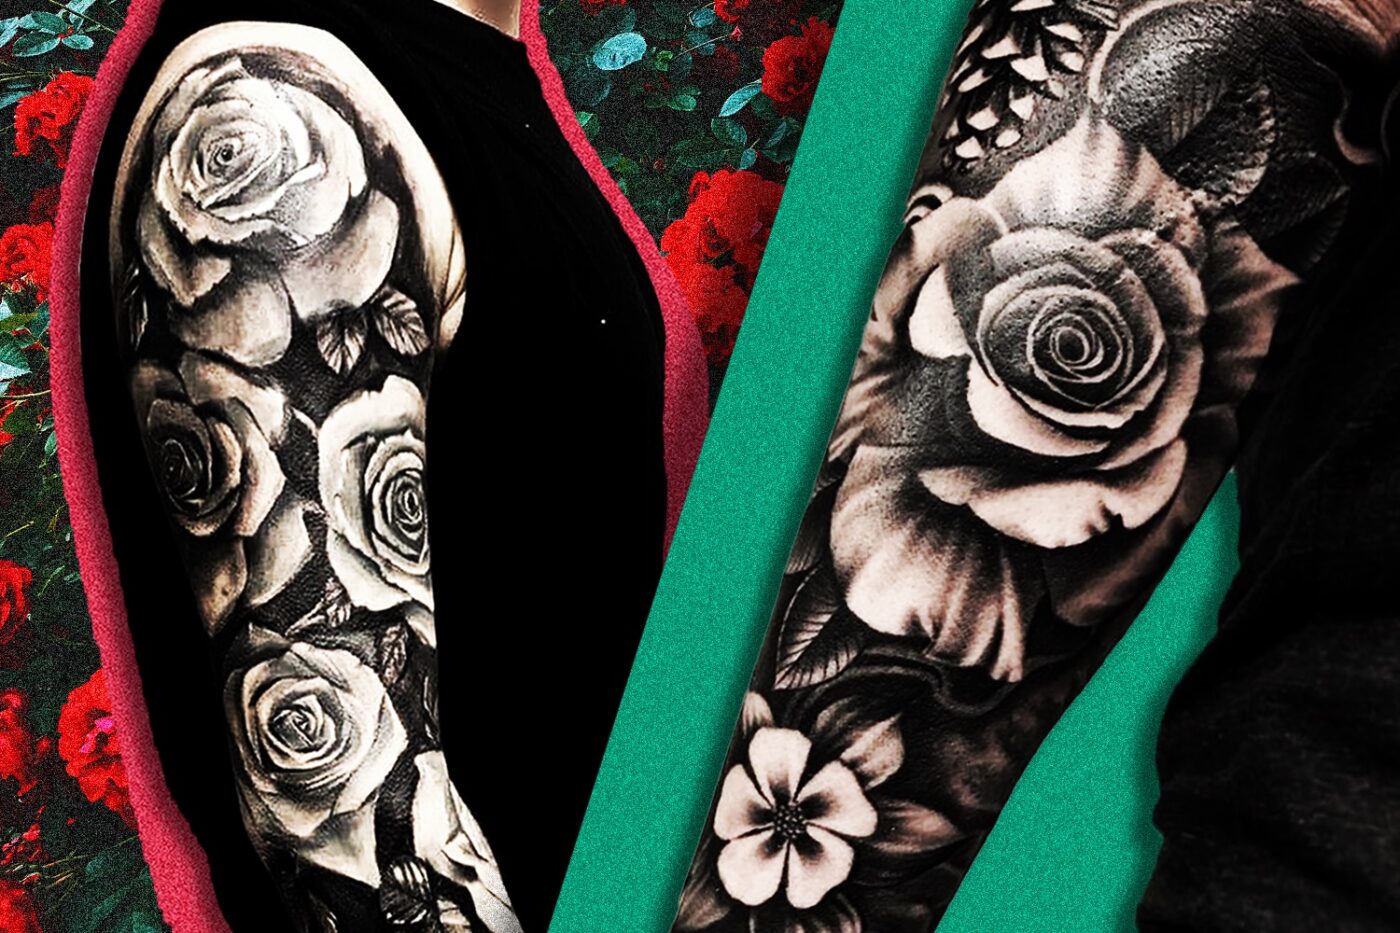 Rose Tattoo On Arm | Tattoo Designs, Tattoo Pictures